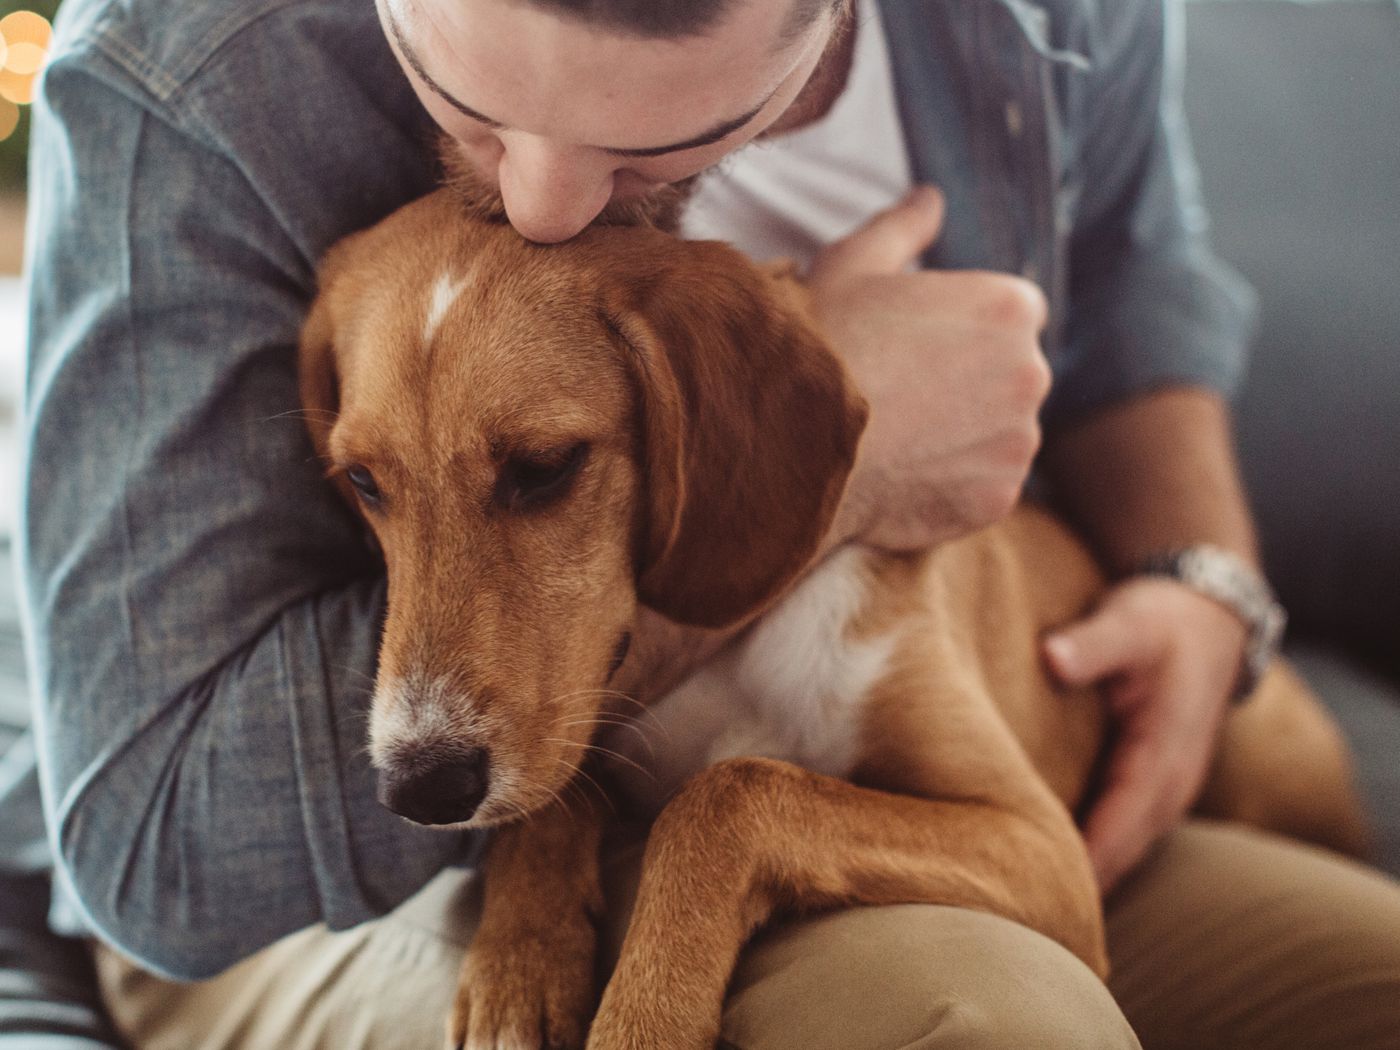 Emotional support animals: there's surprisingly weak scientific evidence on whether they help